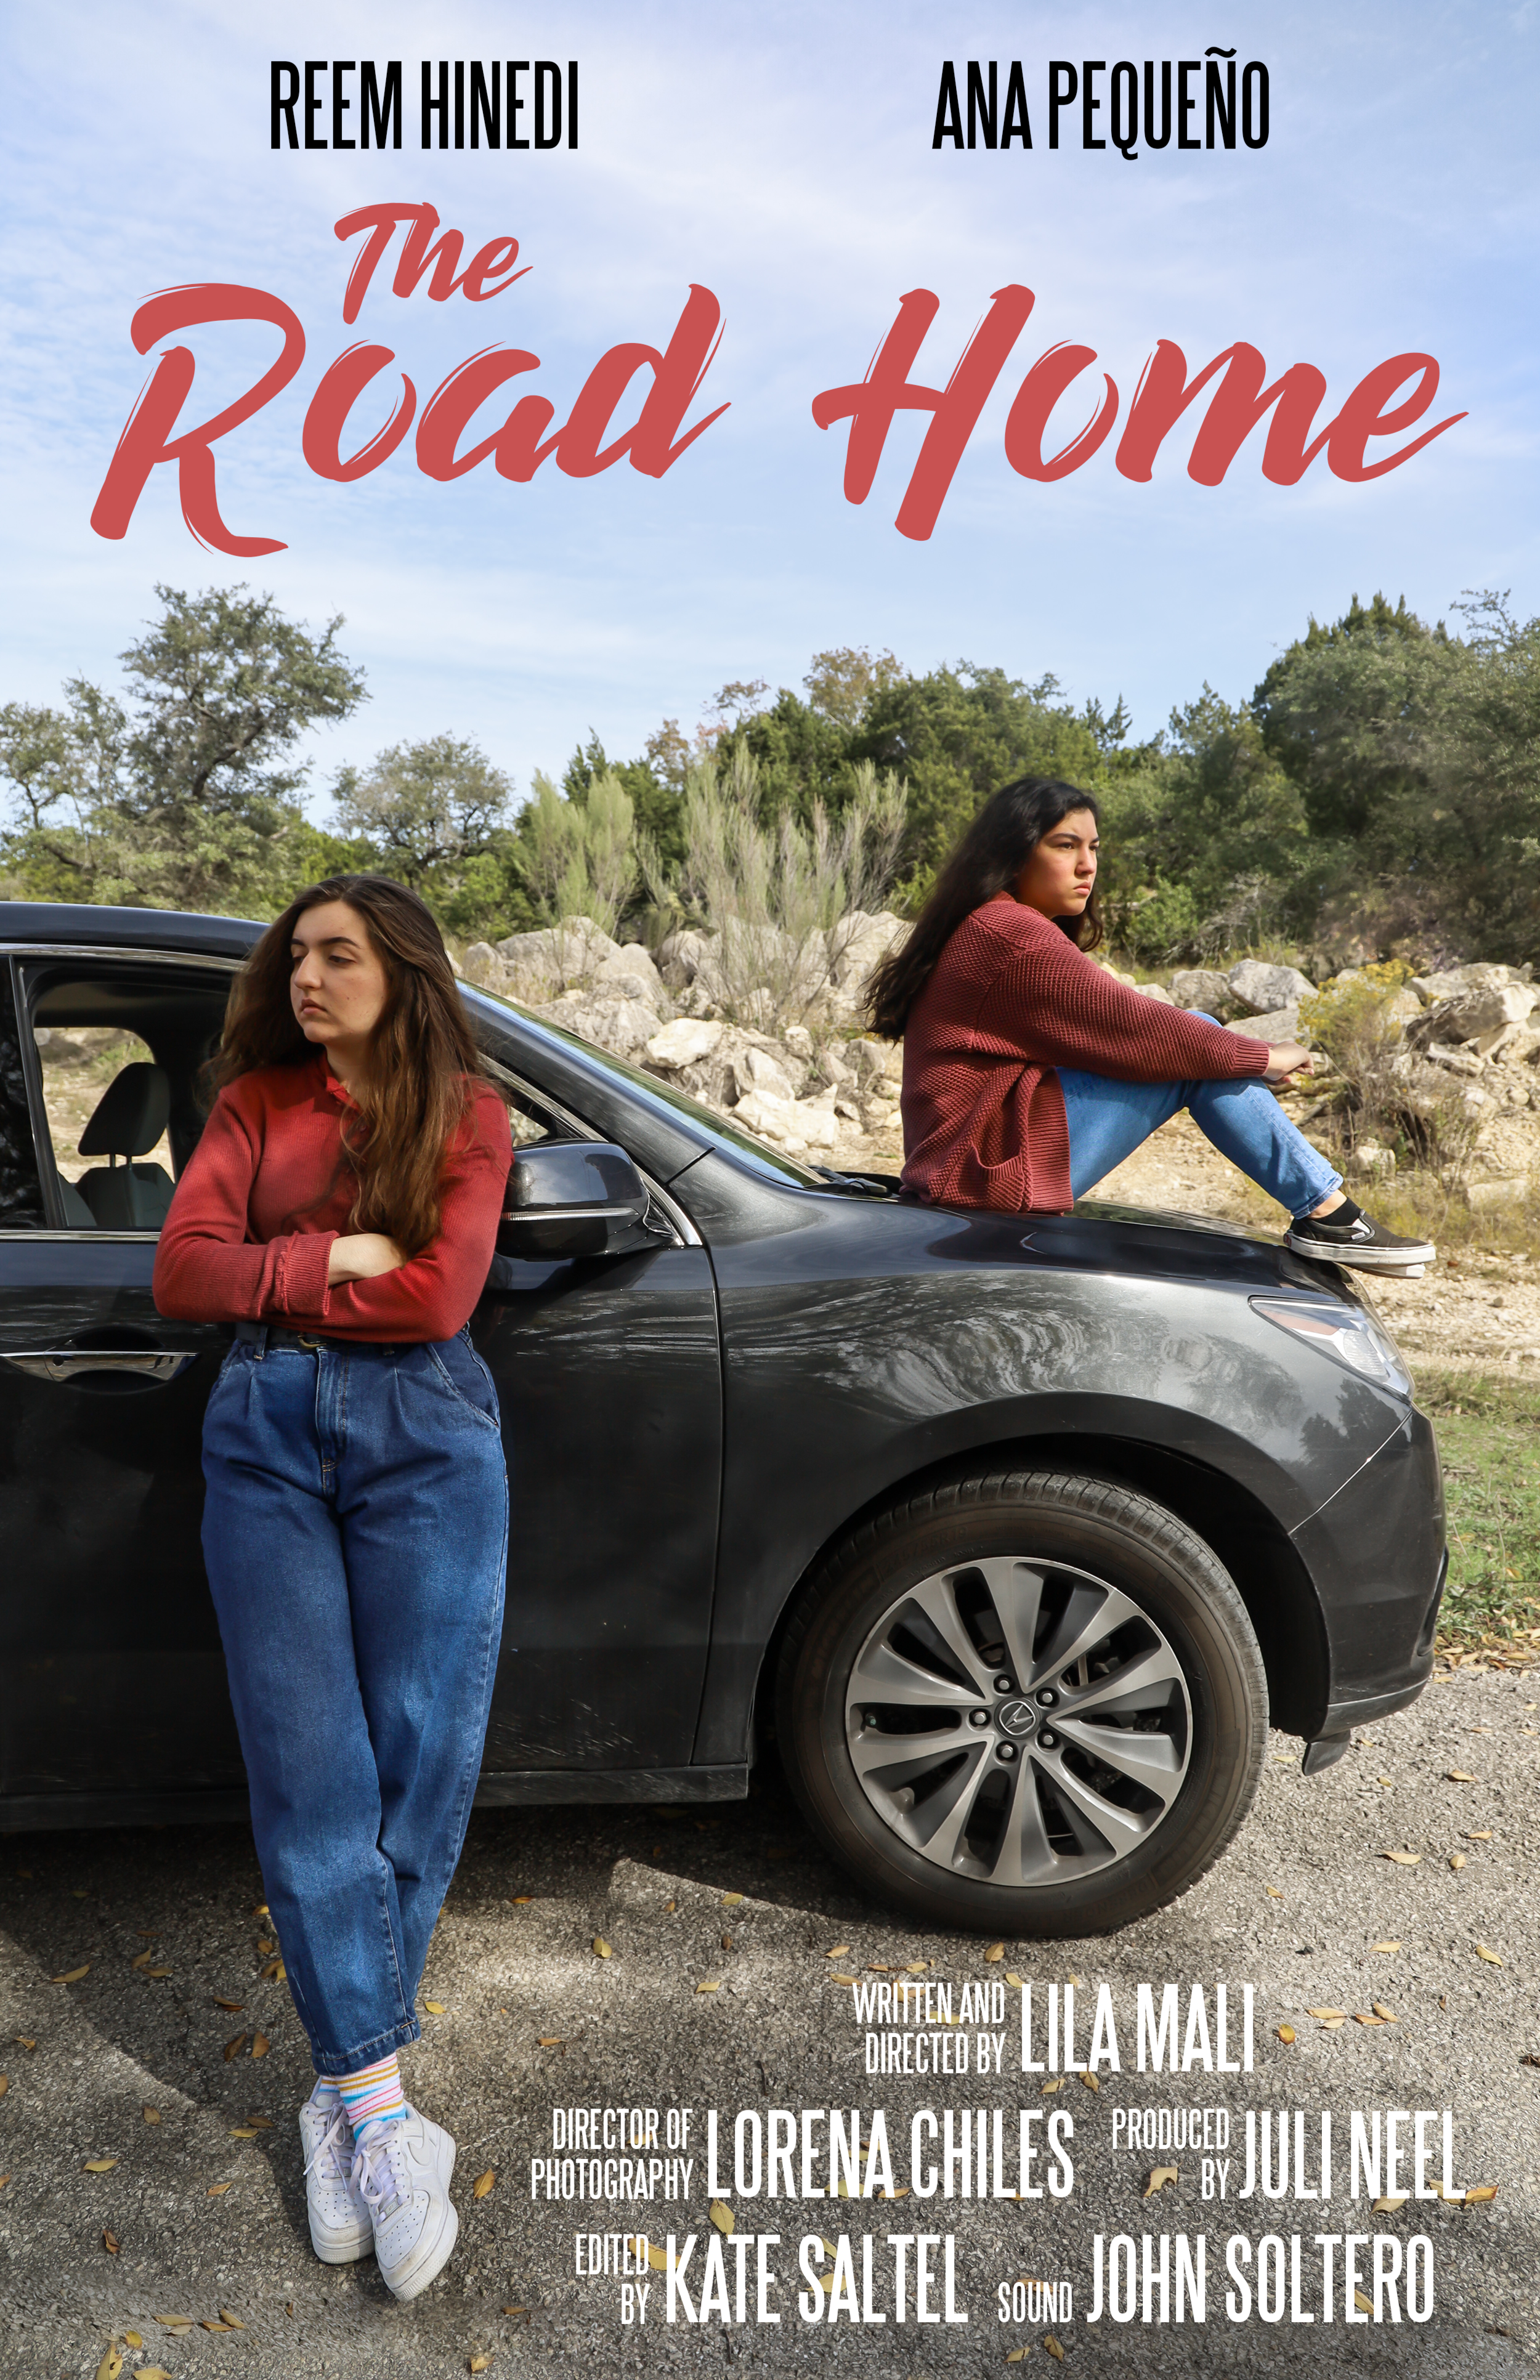 The road home poster.png